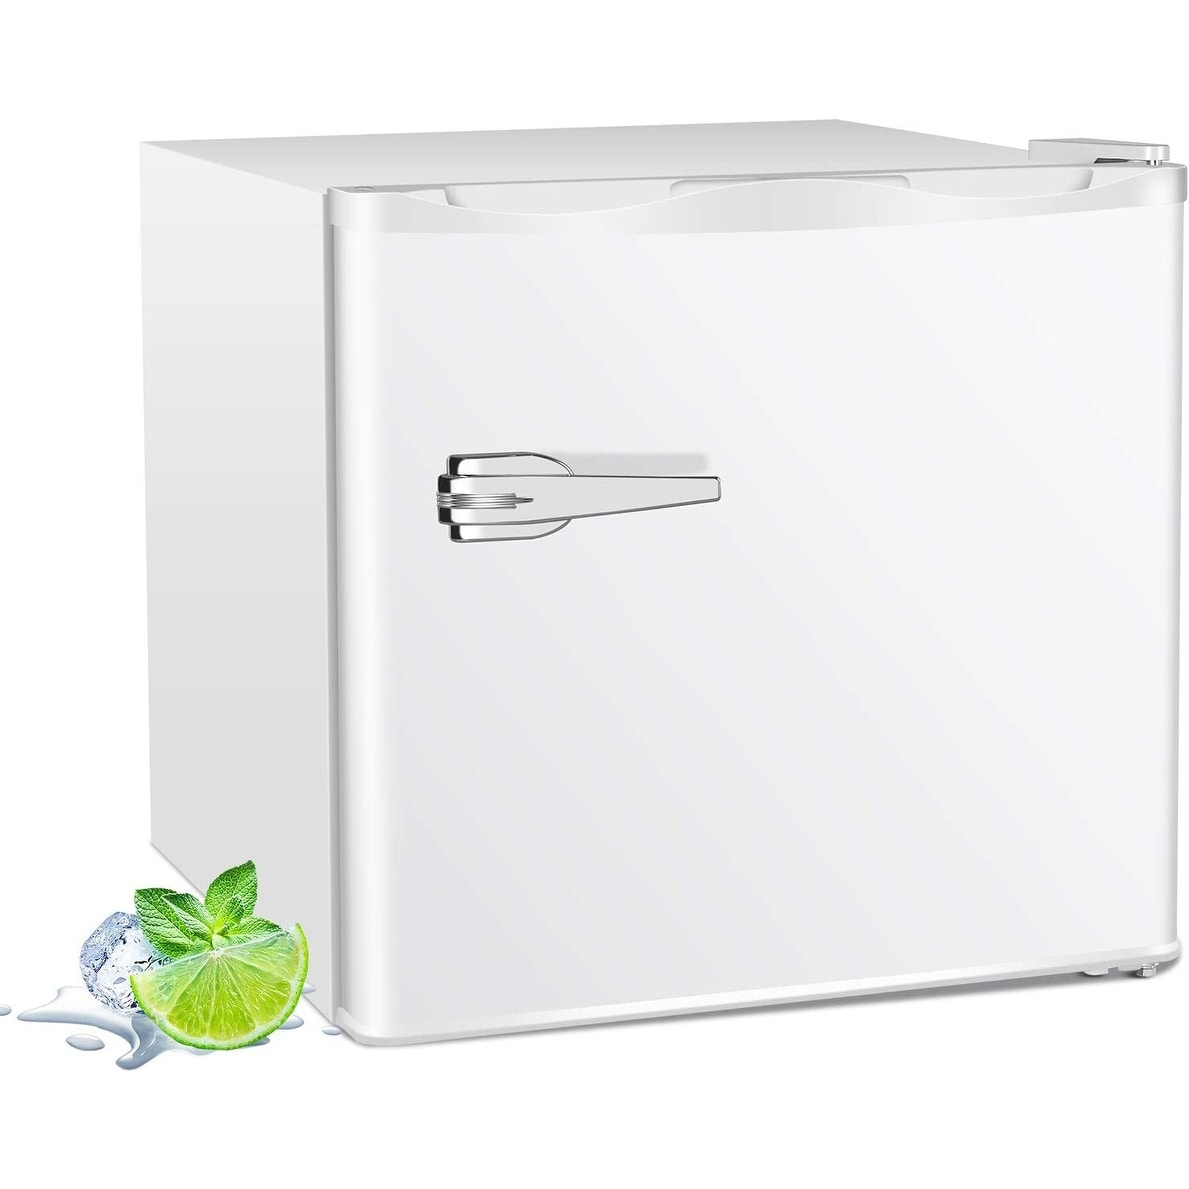 RWFLAME Upright Compact Freezer 3.0 Cu.ft, Freestanding Mini Freezer with  Removable Shelf, Single Door, Adjustable Temperature Control, for Home